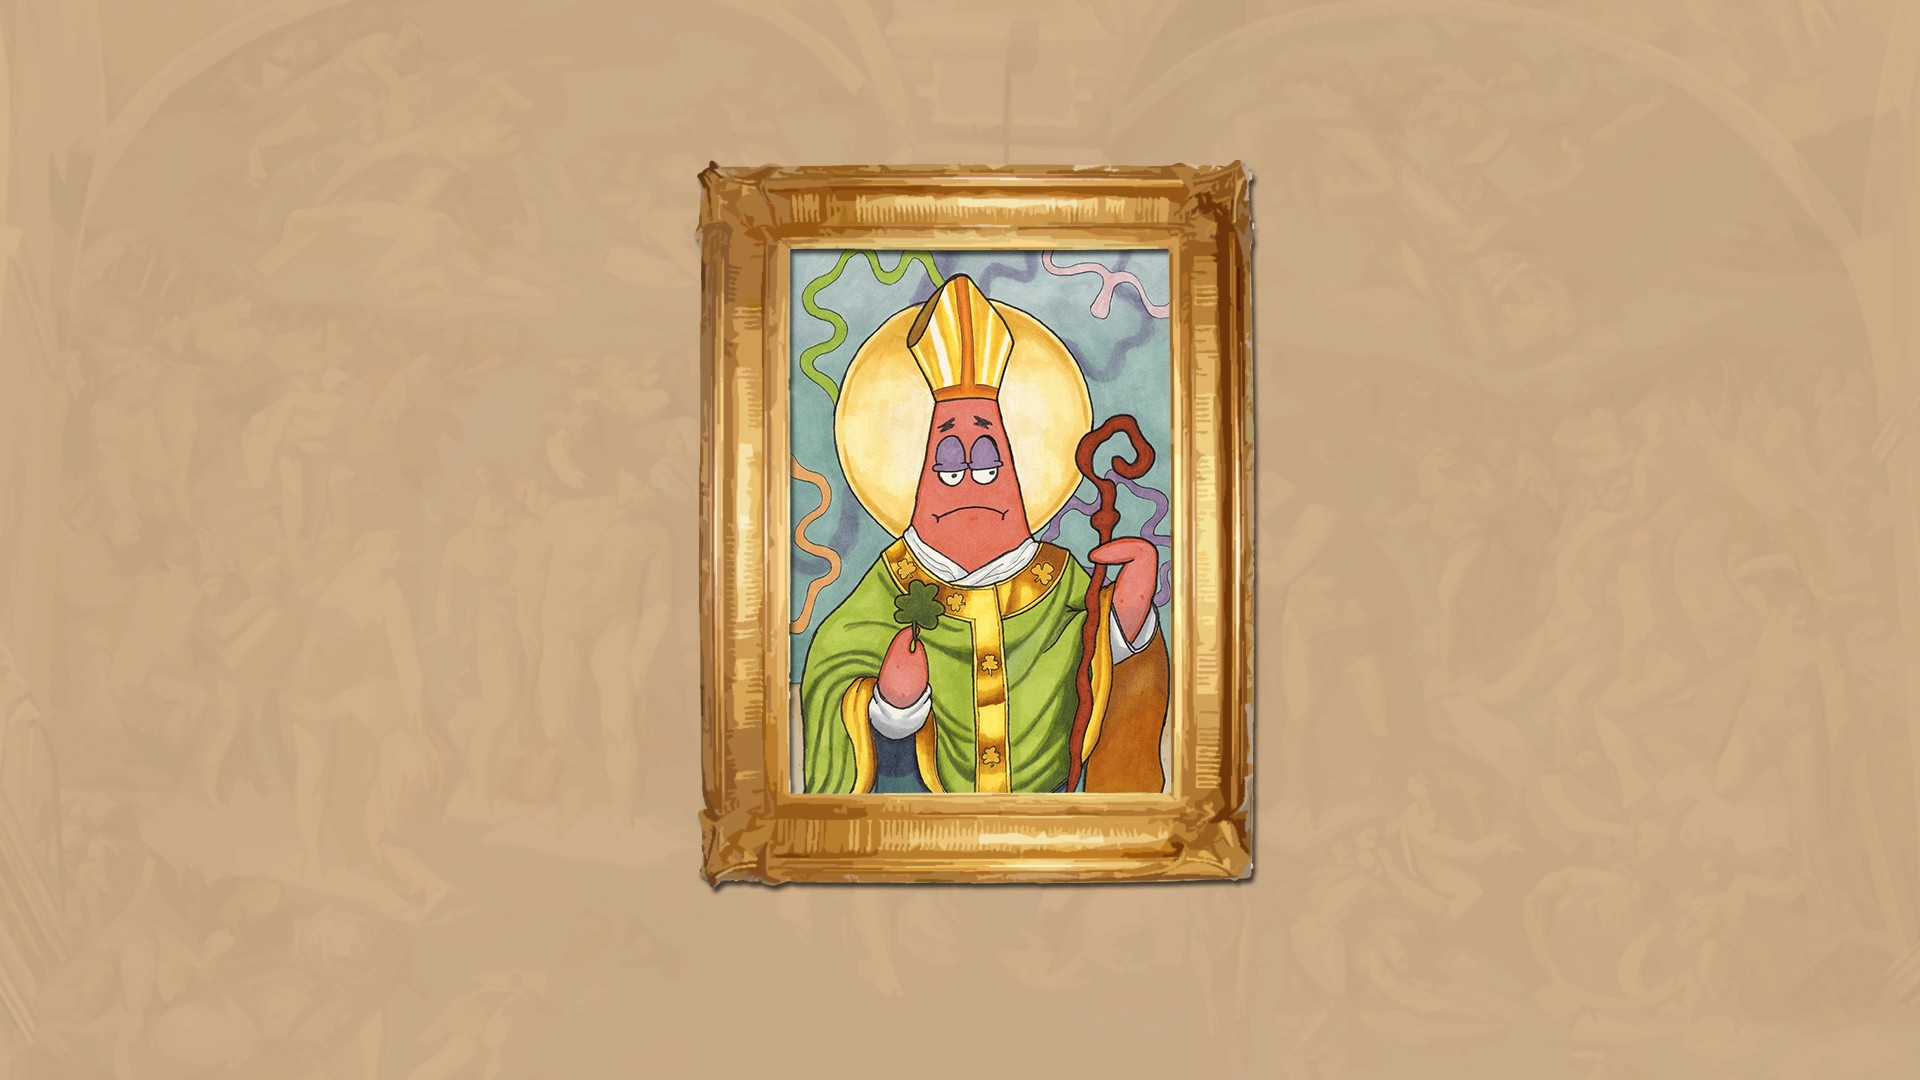 General 1920x1080 pope humor Patrick Star painting hanged wall